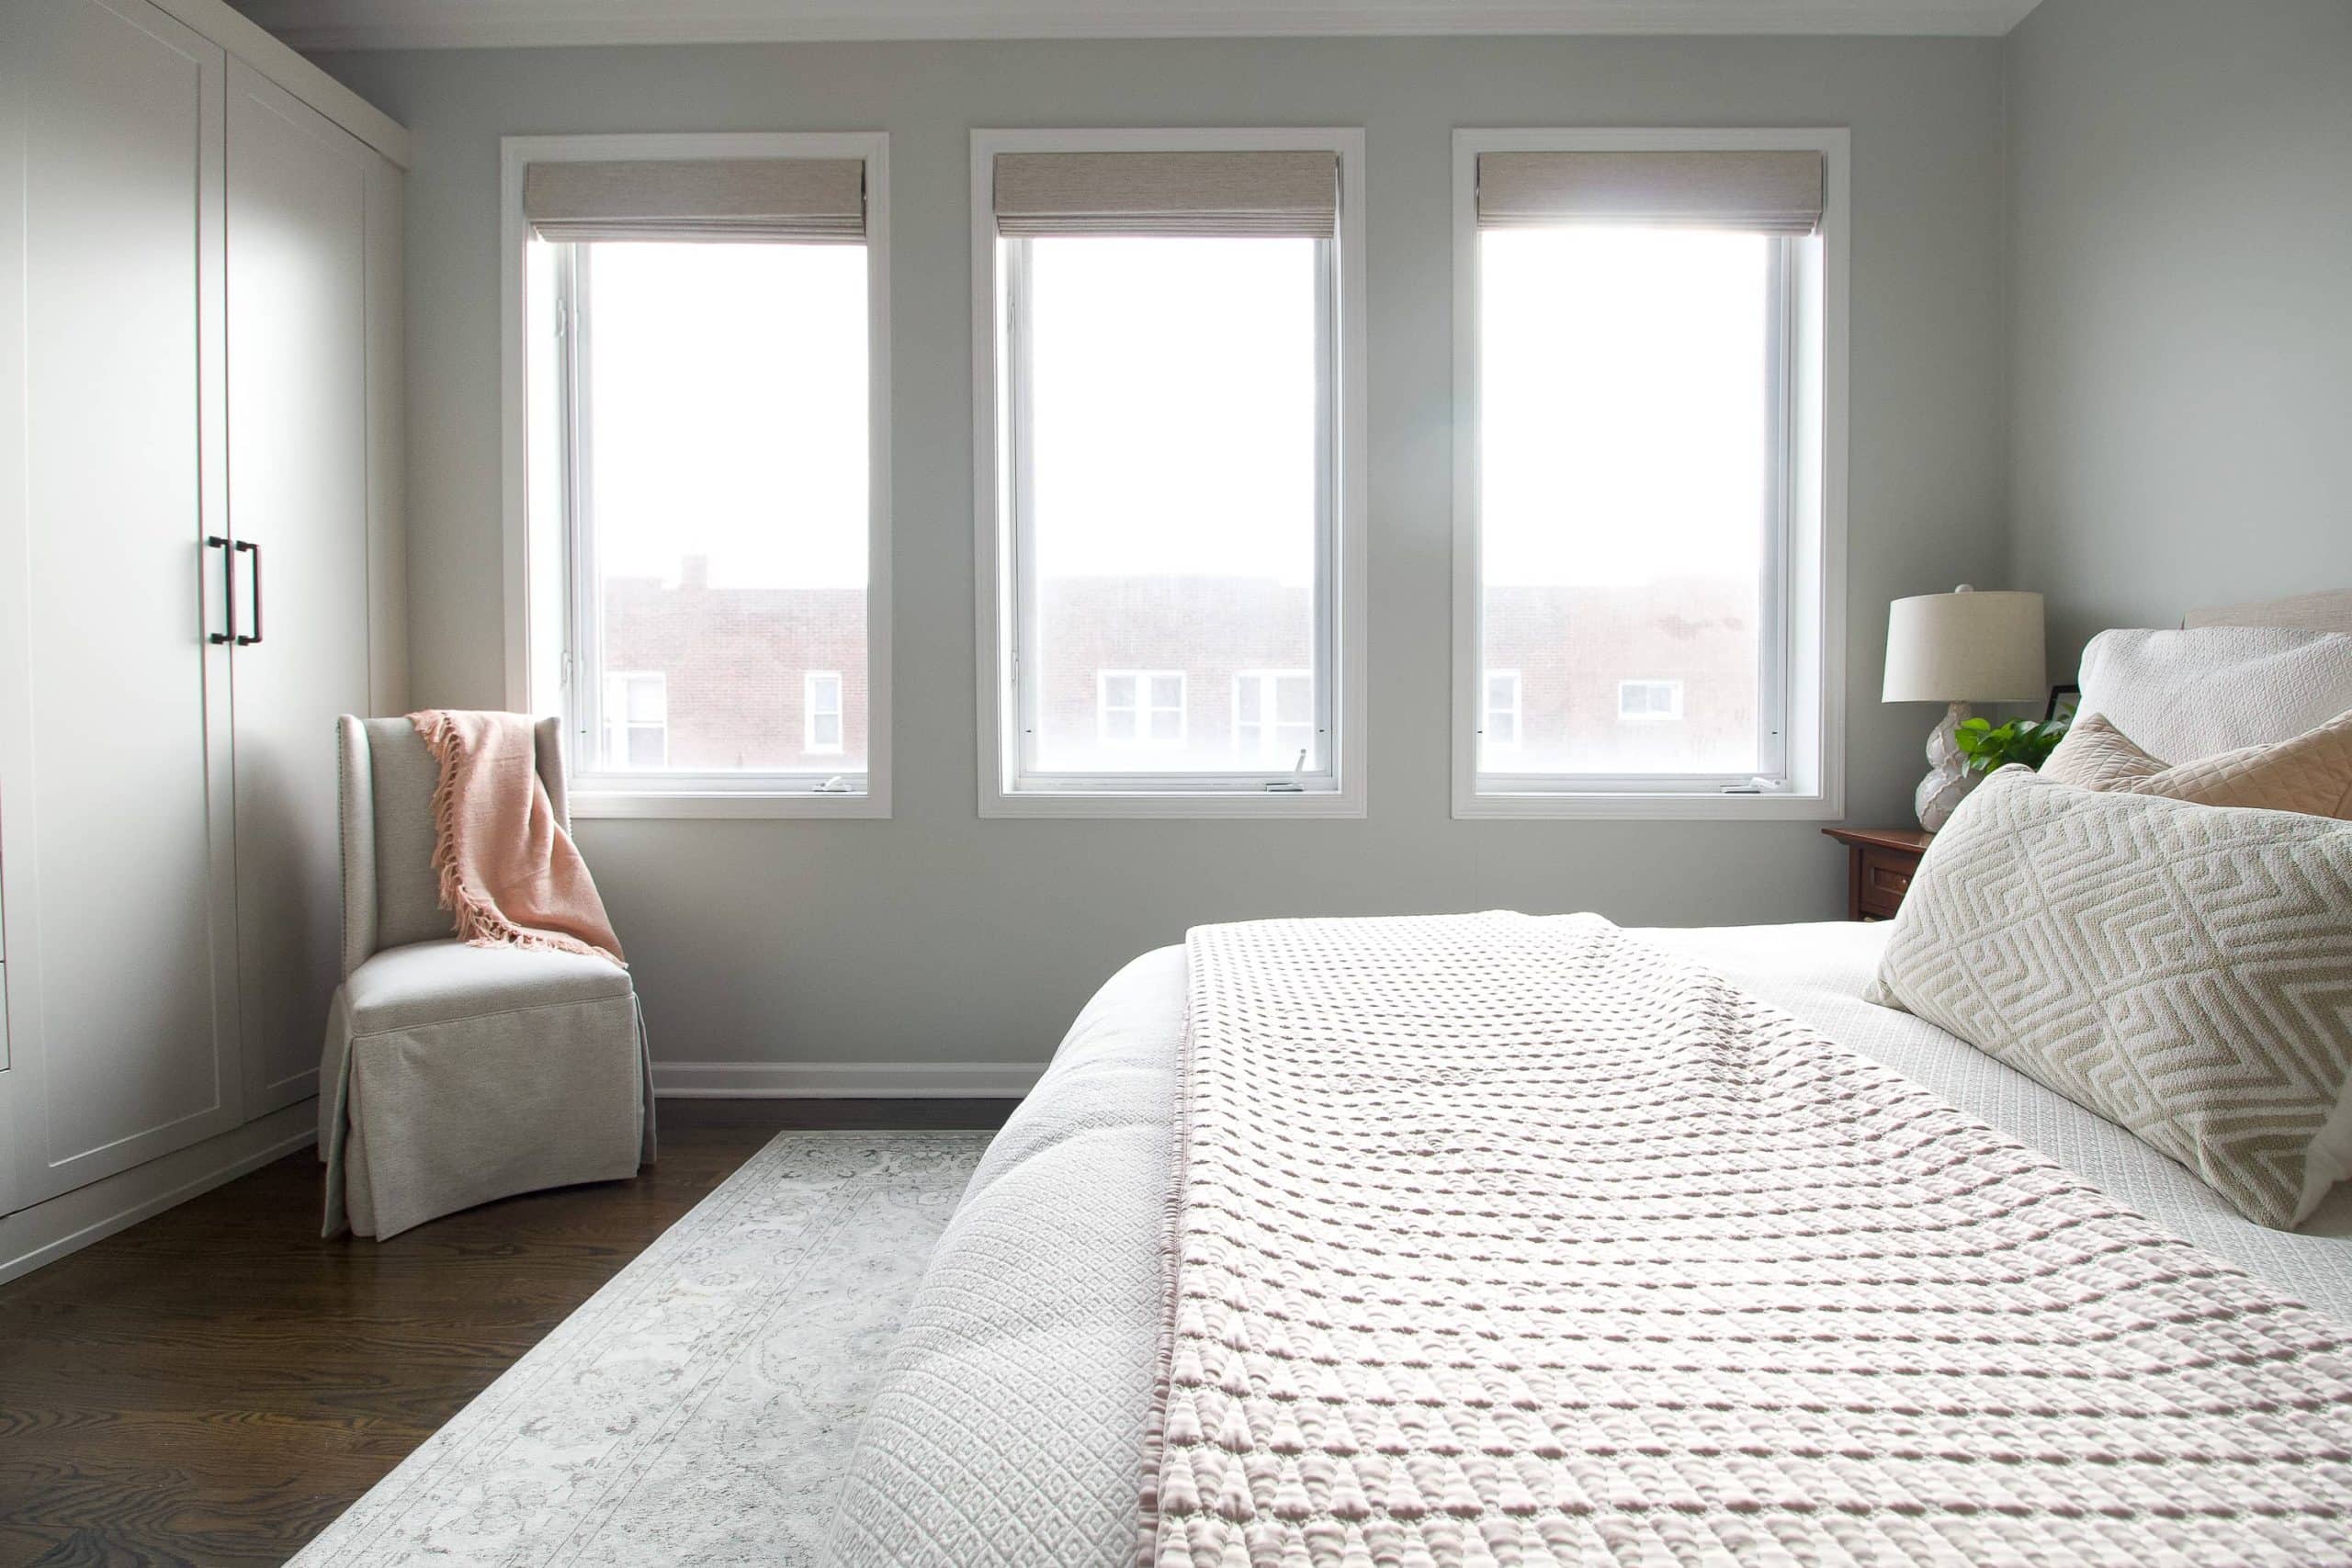 Tips to install woven window shades